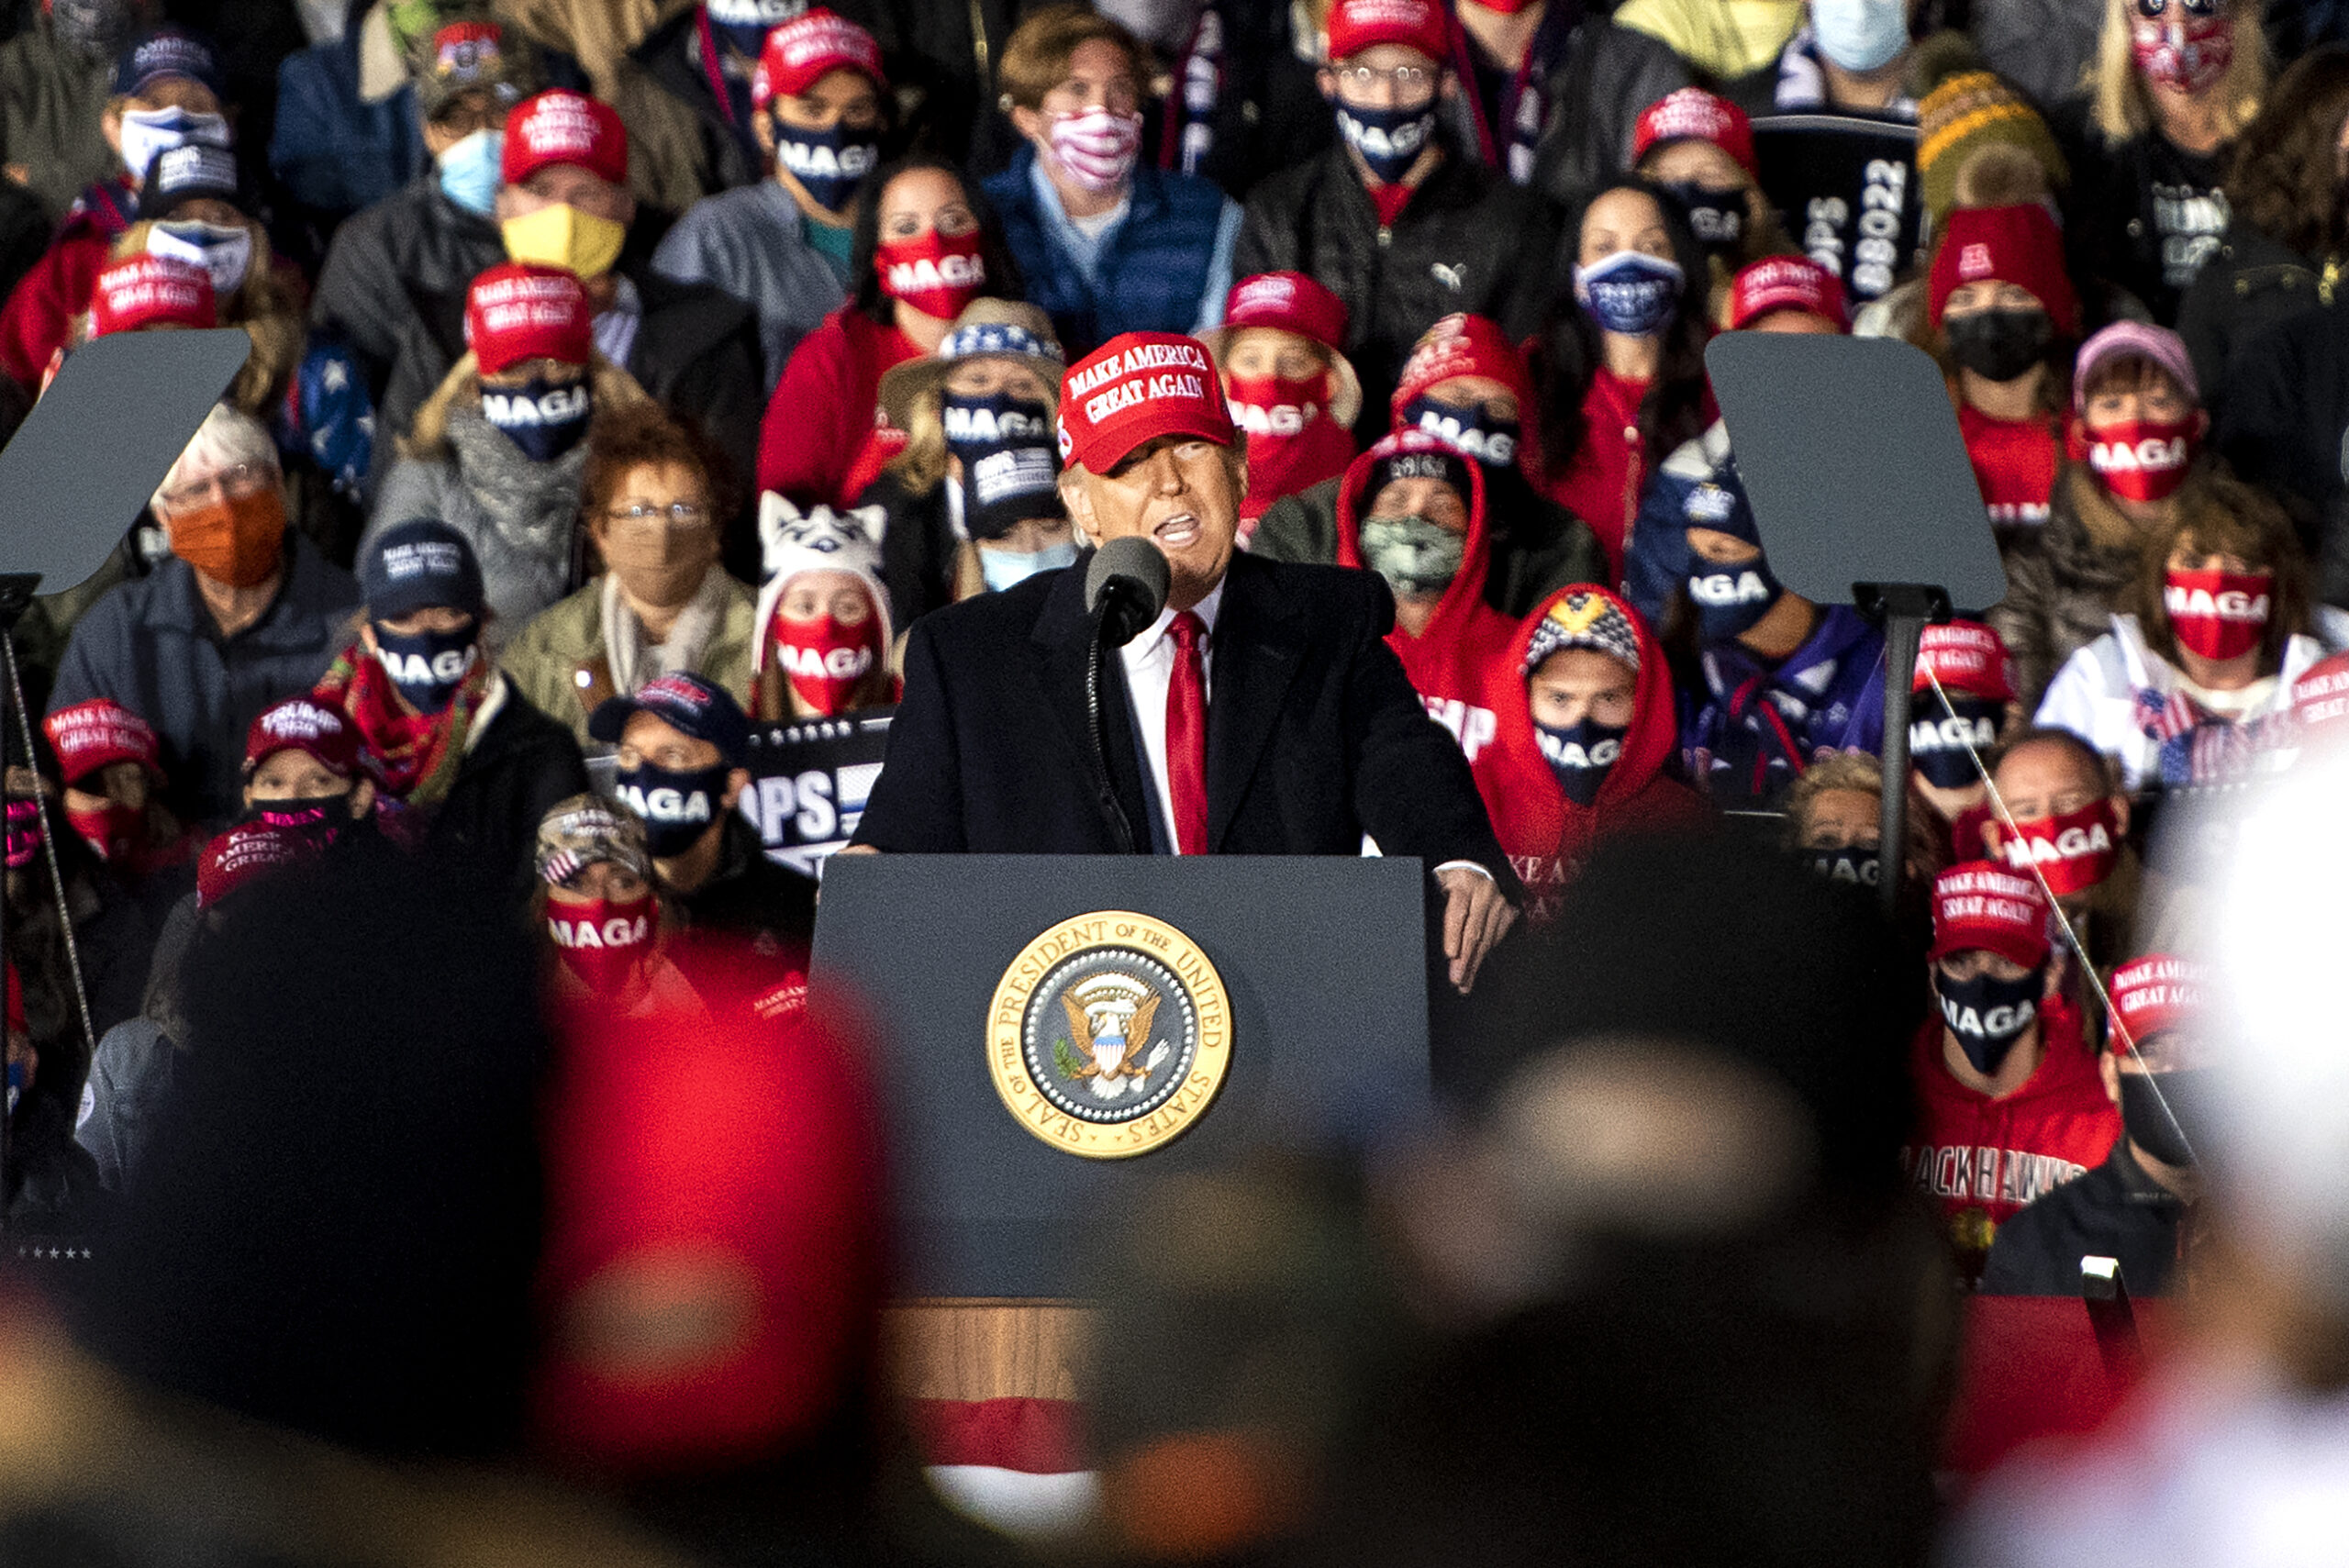 President Donald Trump stands on stage wearing a red MAGA hat as he speaks to supporters